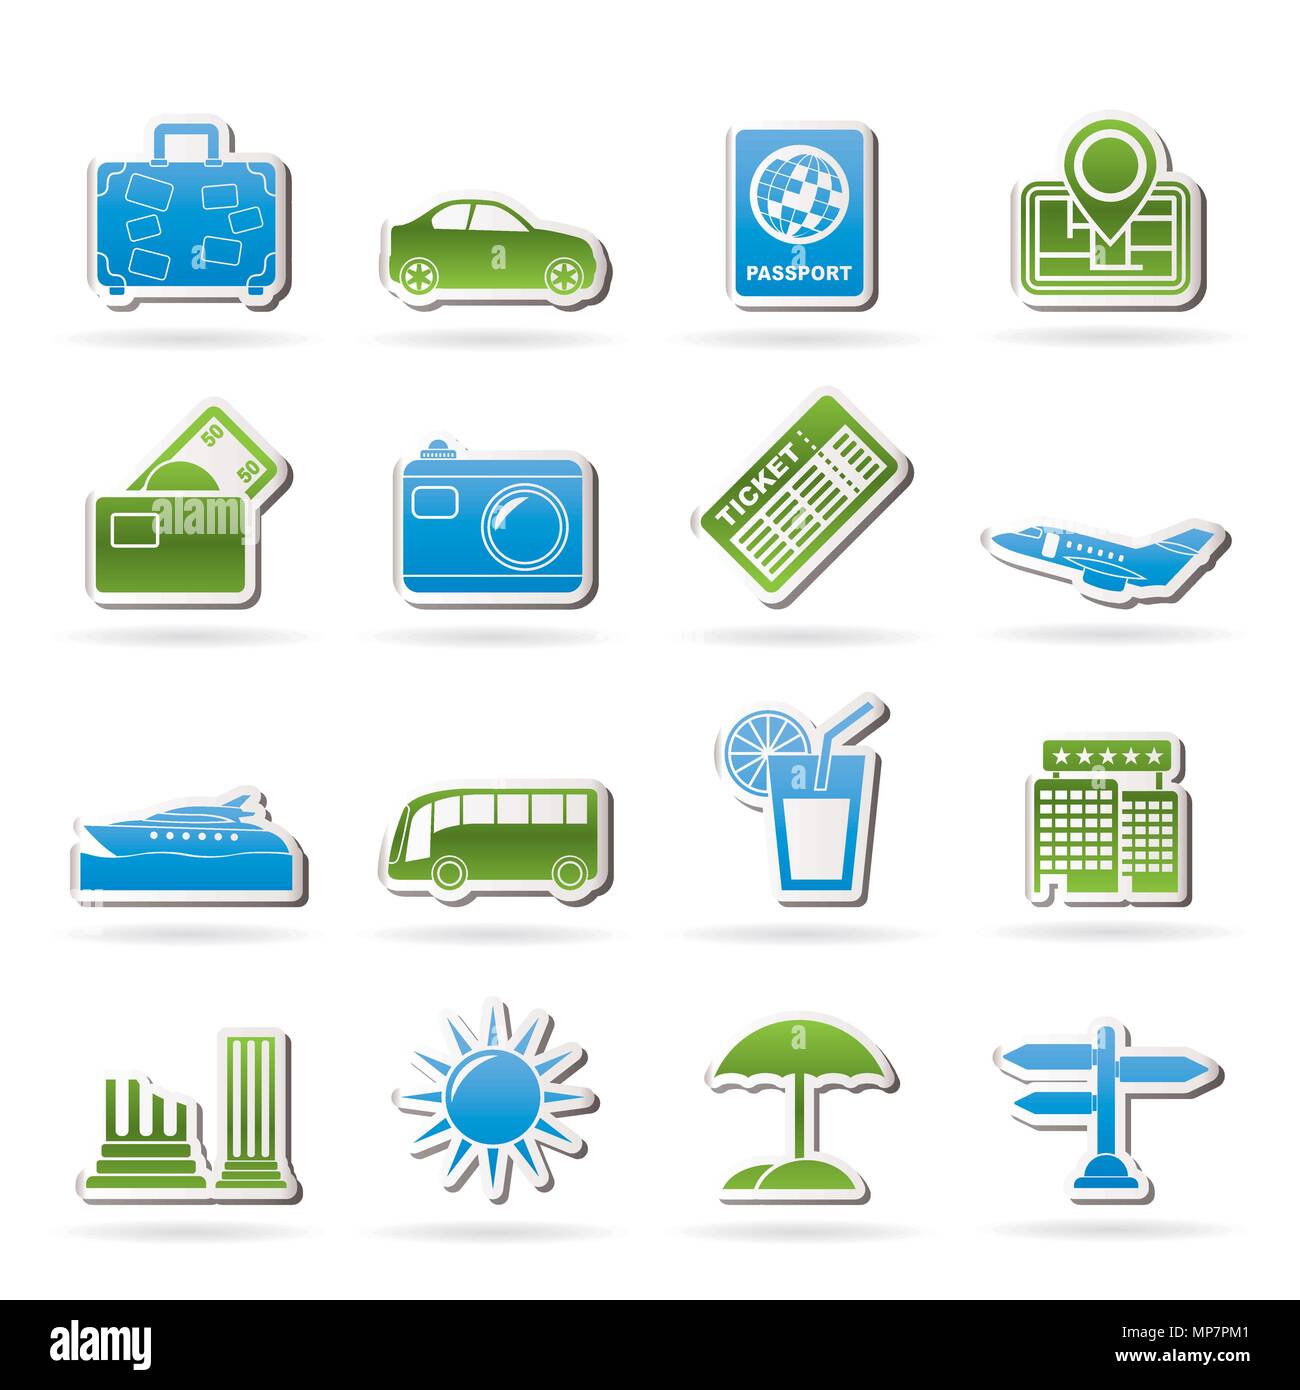 Travel and vacation icons - vector icon set Stock Vector